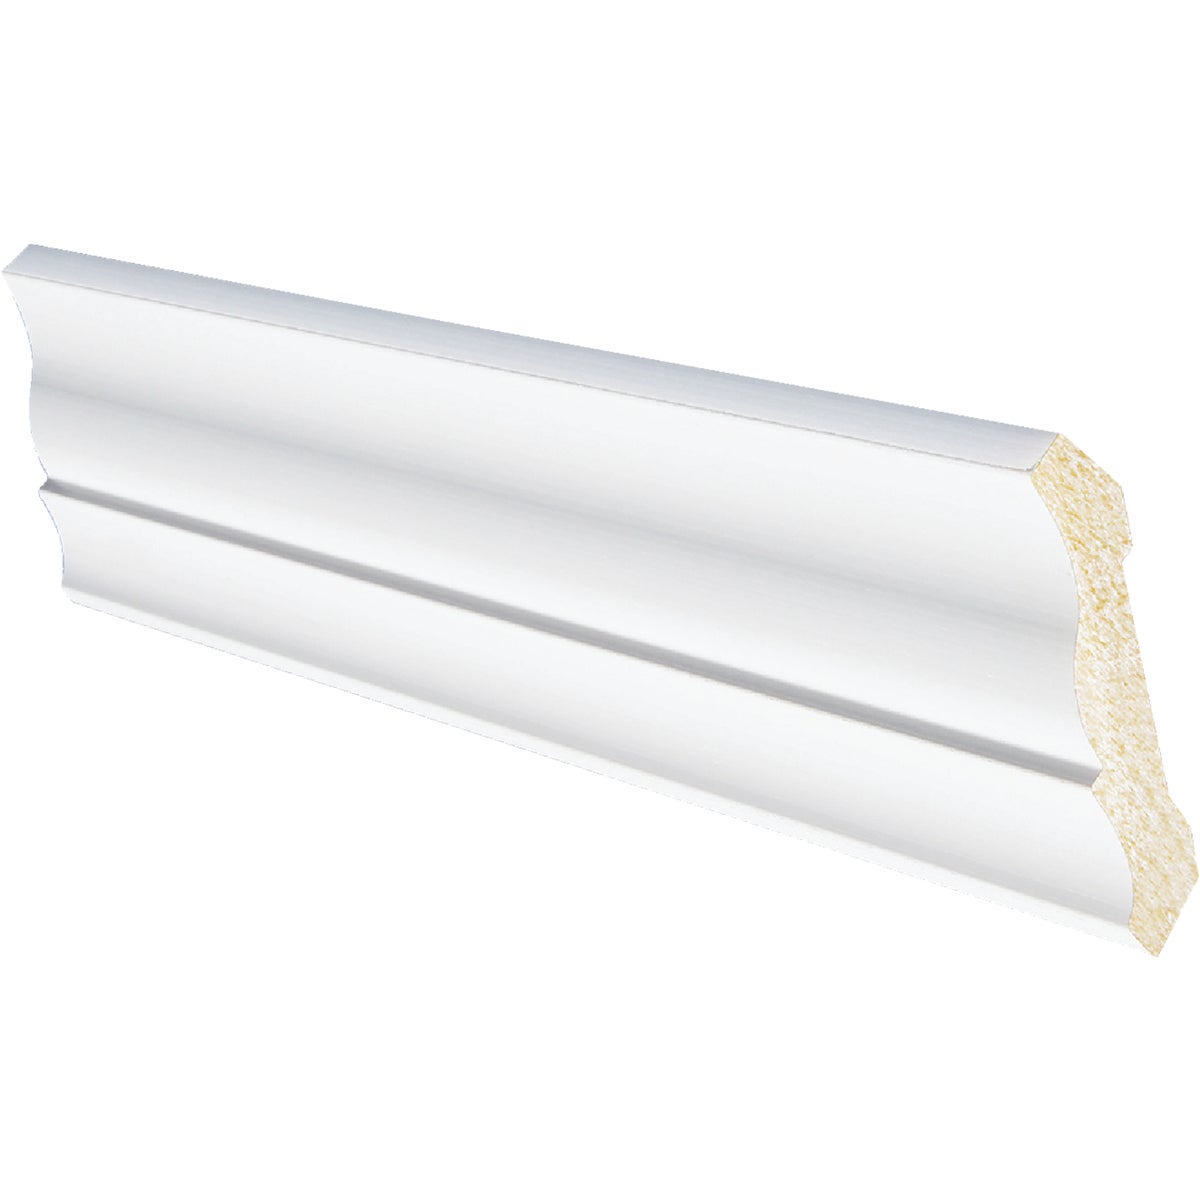 Item 160492, Pre-finished crown molding that is easy to install.